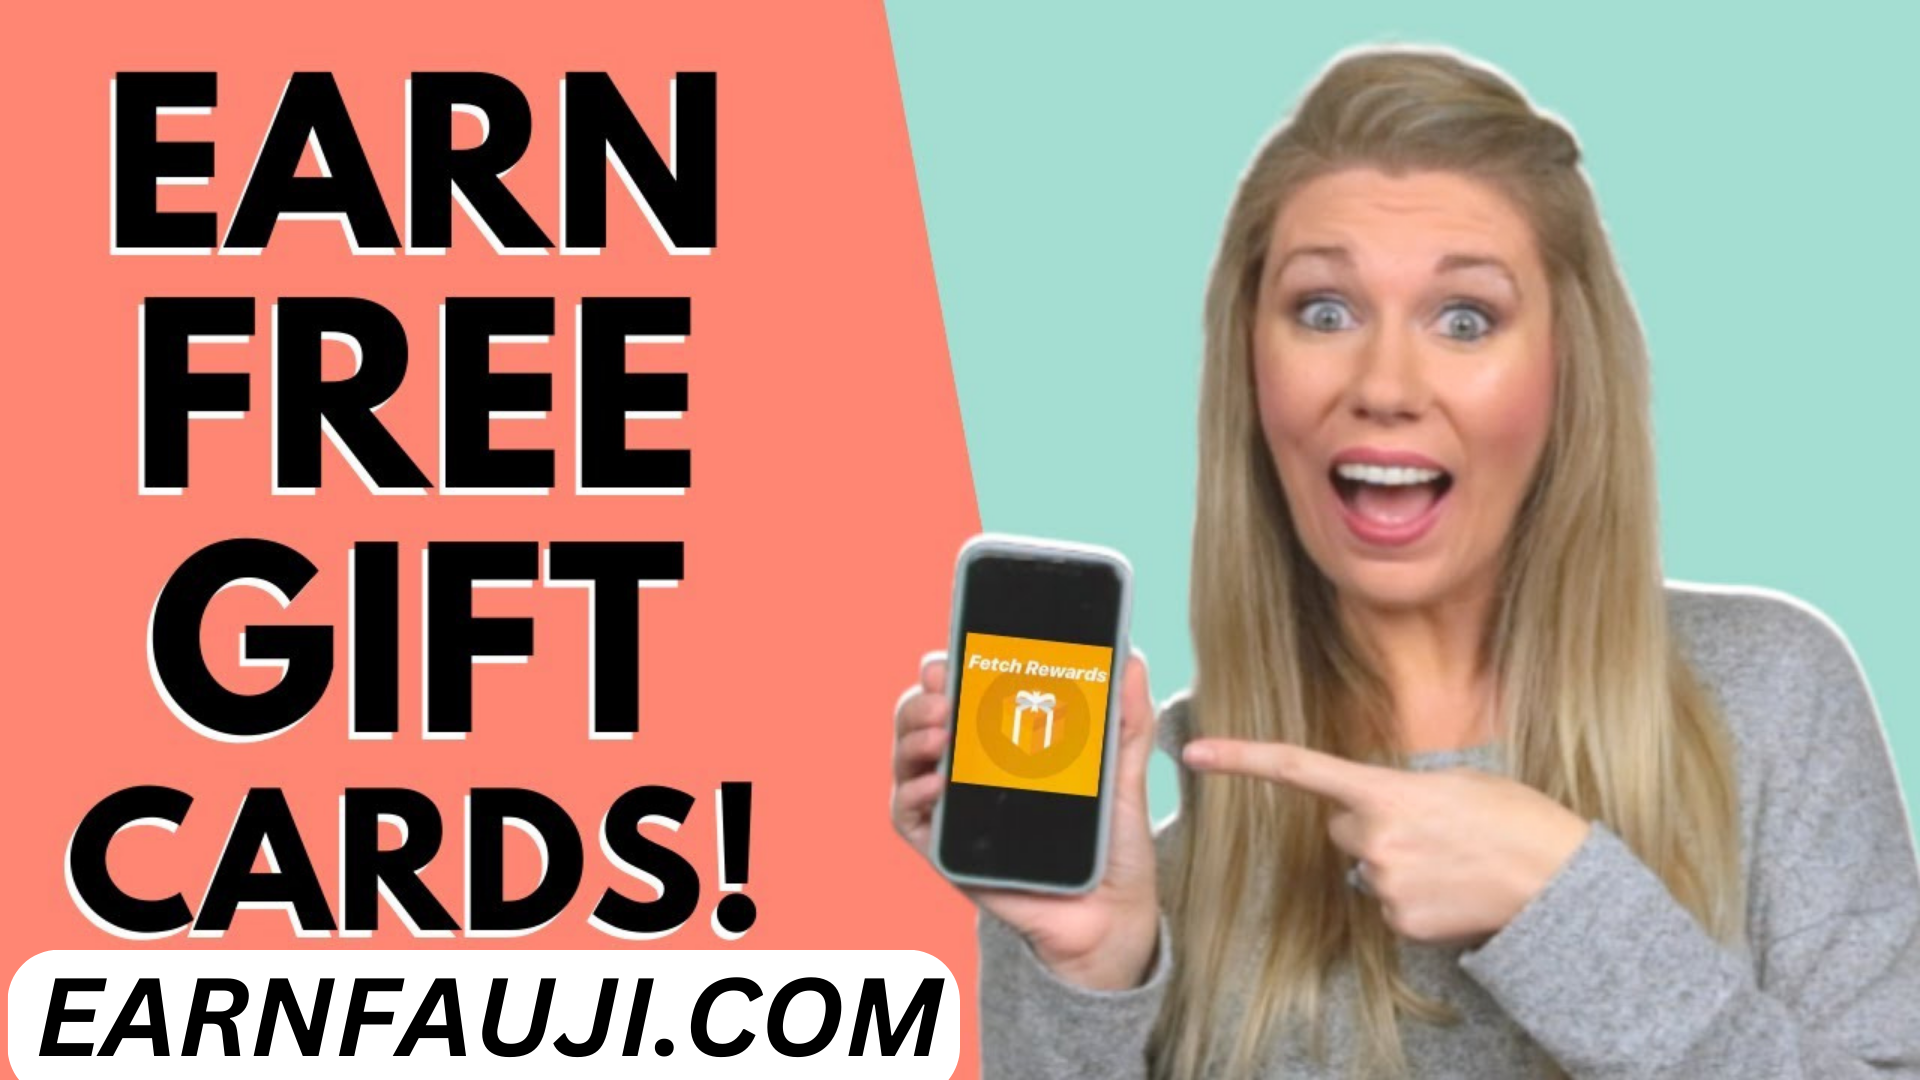 THE POTENTIAL HOW TO EARN GIFT CARDS ONLINE